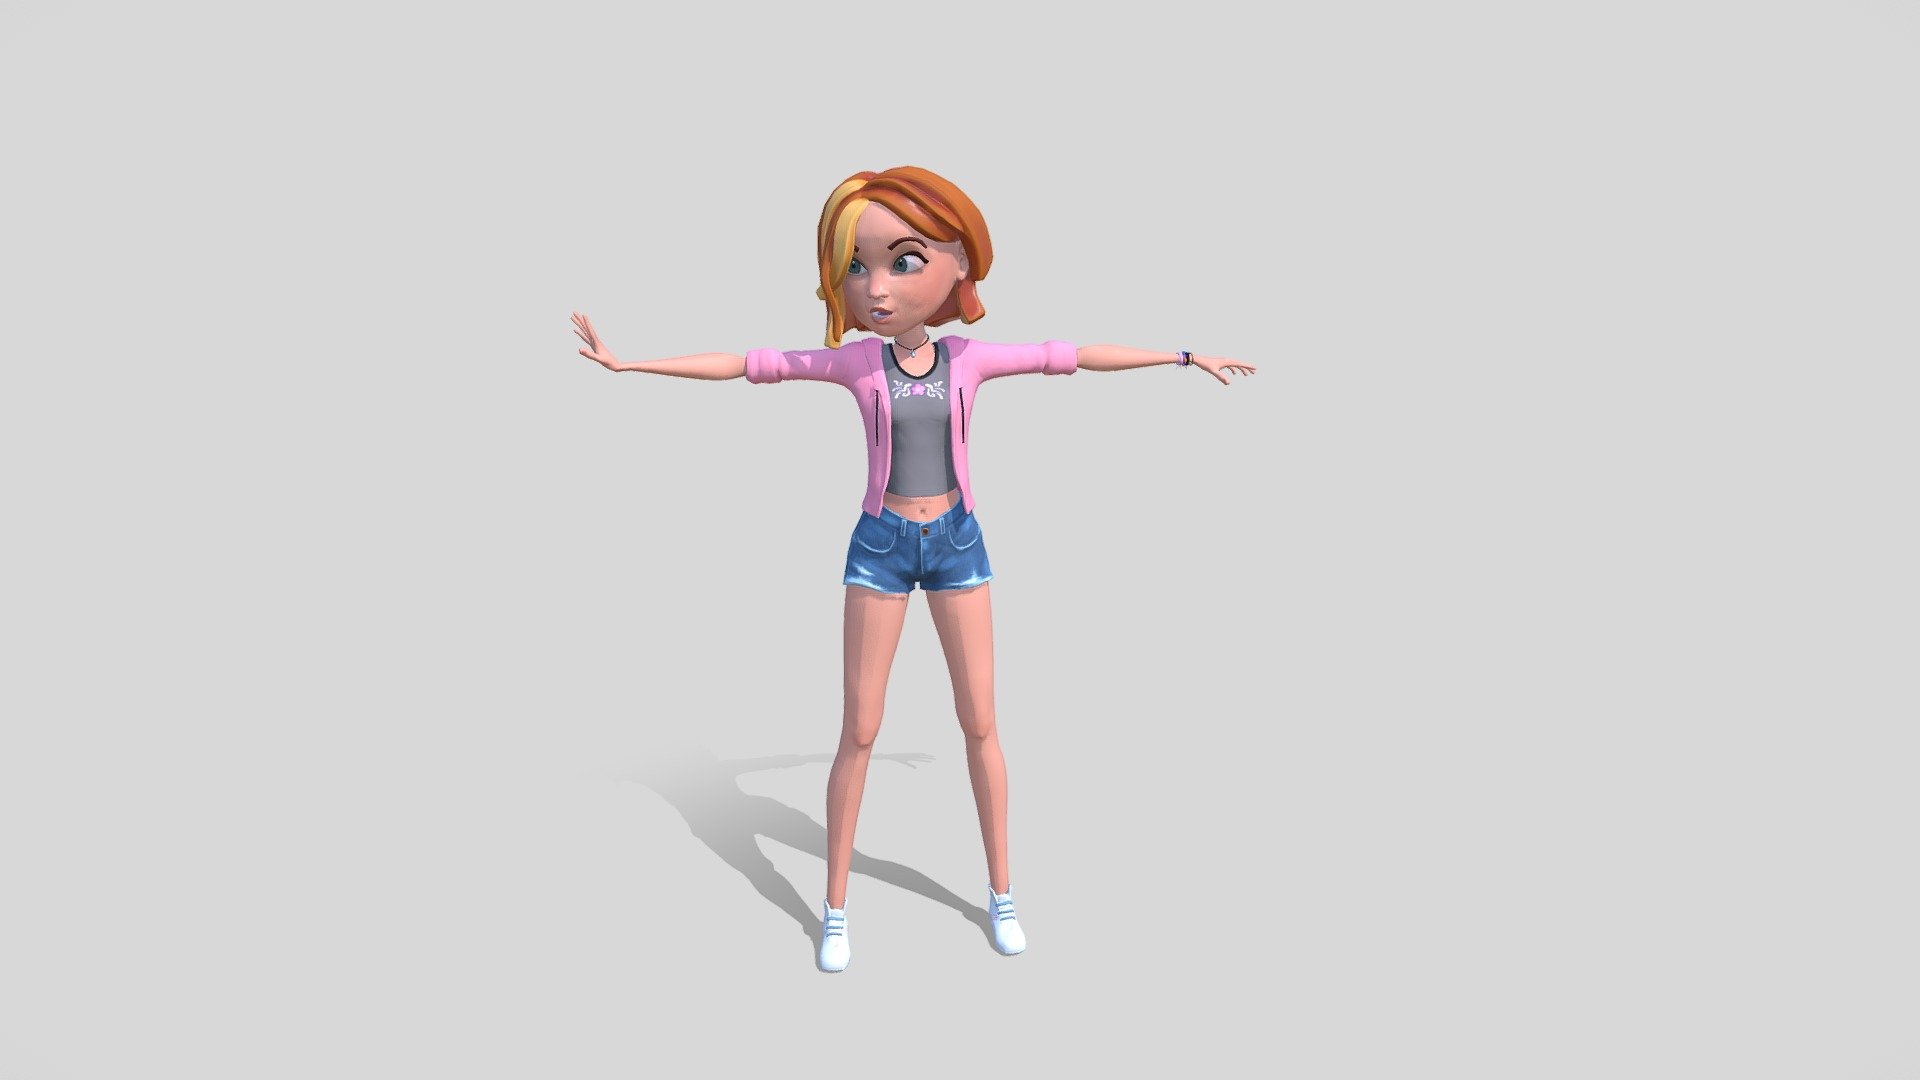 3D Cartoon Teenager Girl character for real-time apps, tested with Unity 3D engine.
Modeled with 3ds Max 2015 and textured with 3d-Coat 4.8.

Download source files .MAX rig and Unity package from additional file.



Grouped into 4 separated meshes. Body, Head, Hair, Outfit.
12k quad polygons or 25k triangles.
Character is originally rigged on 3ds Max with Biped and Skin, including 32 morph targets (blend shapes).
The skeleton is tested and compatible with unity Humanoid type rig.
Scene objects are organized by layers 3d model